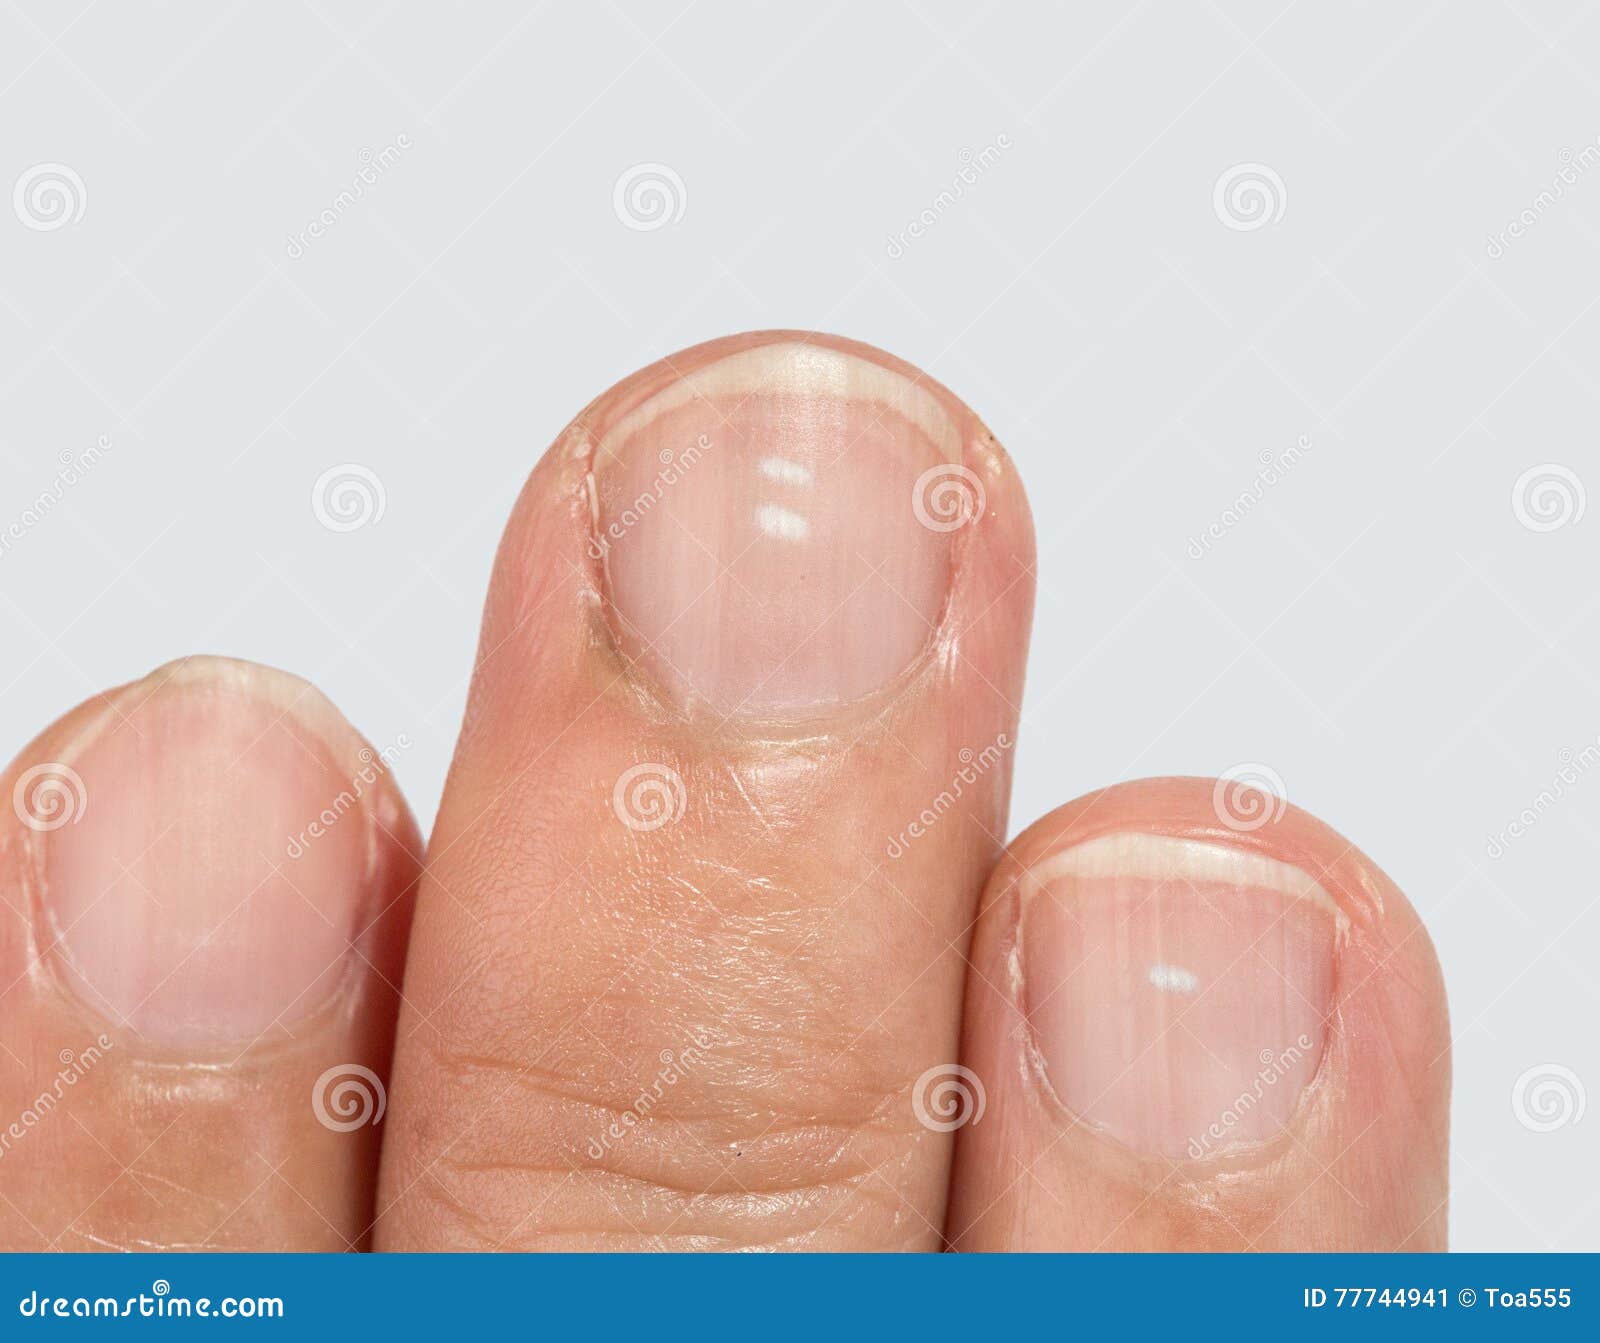 What Your Ragged Fingernails Can Tell You About Your Health | CafeMom.com